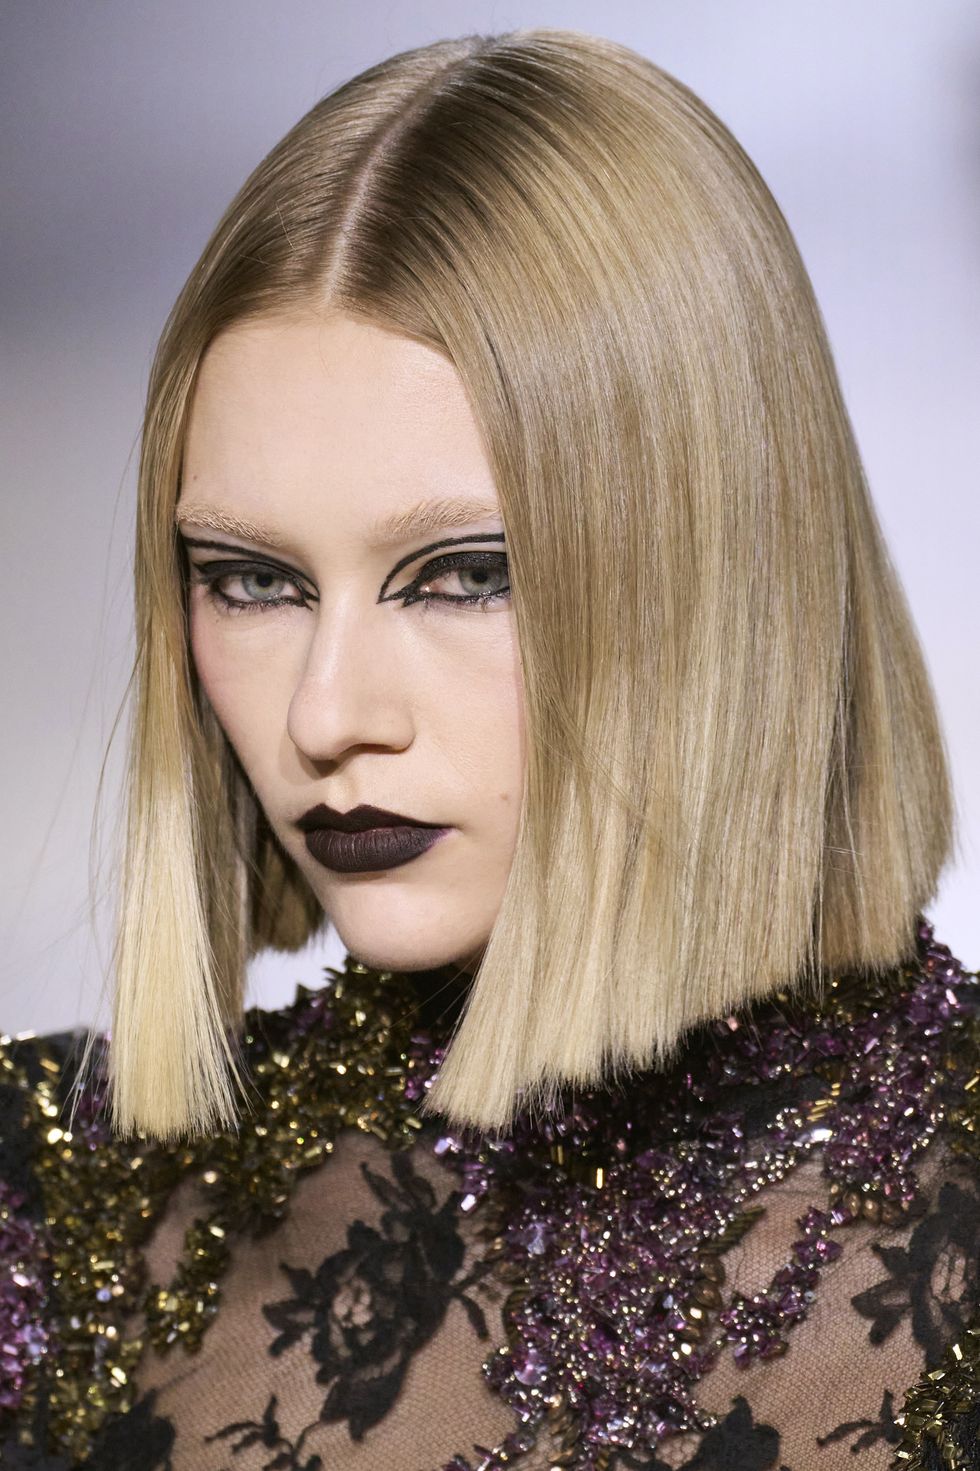 The 6 Hottest Fall Makeup Trends - V Magazine